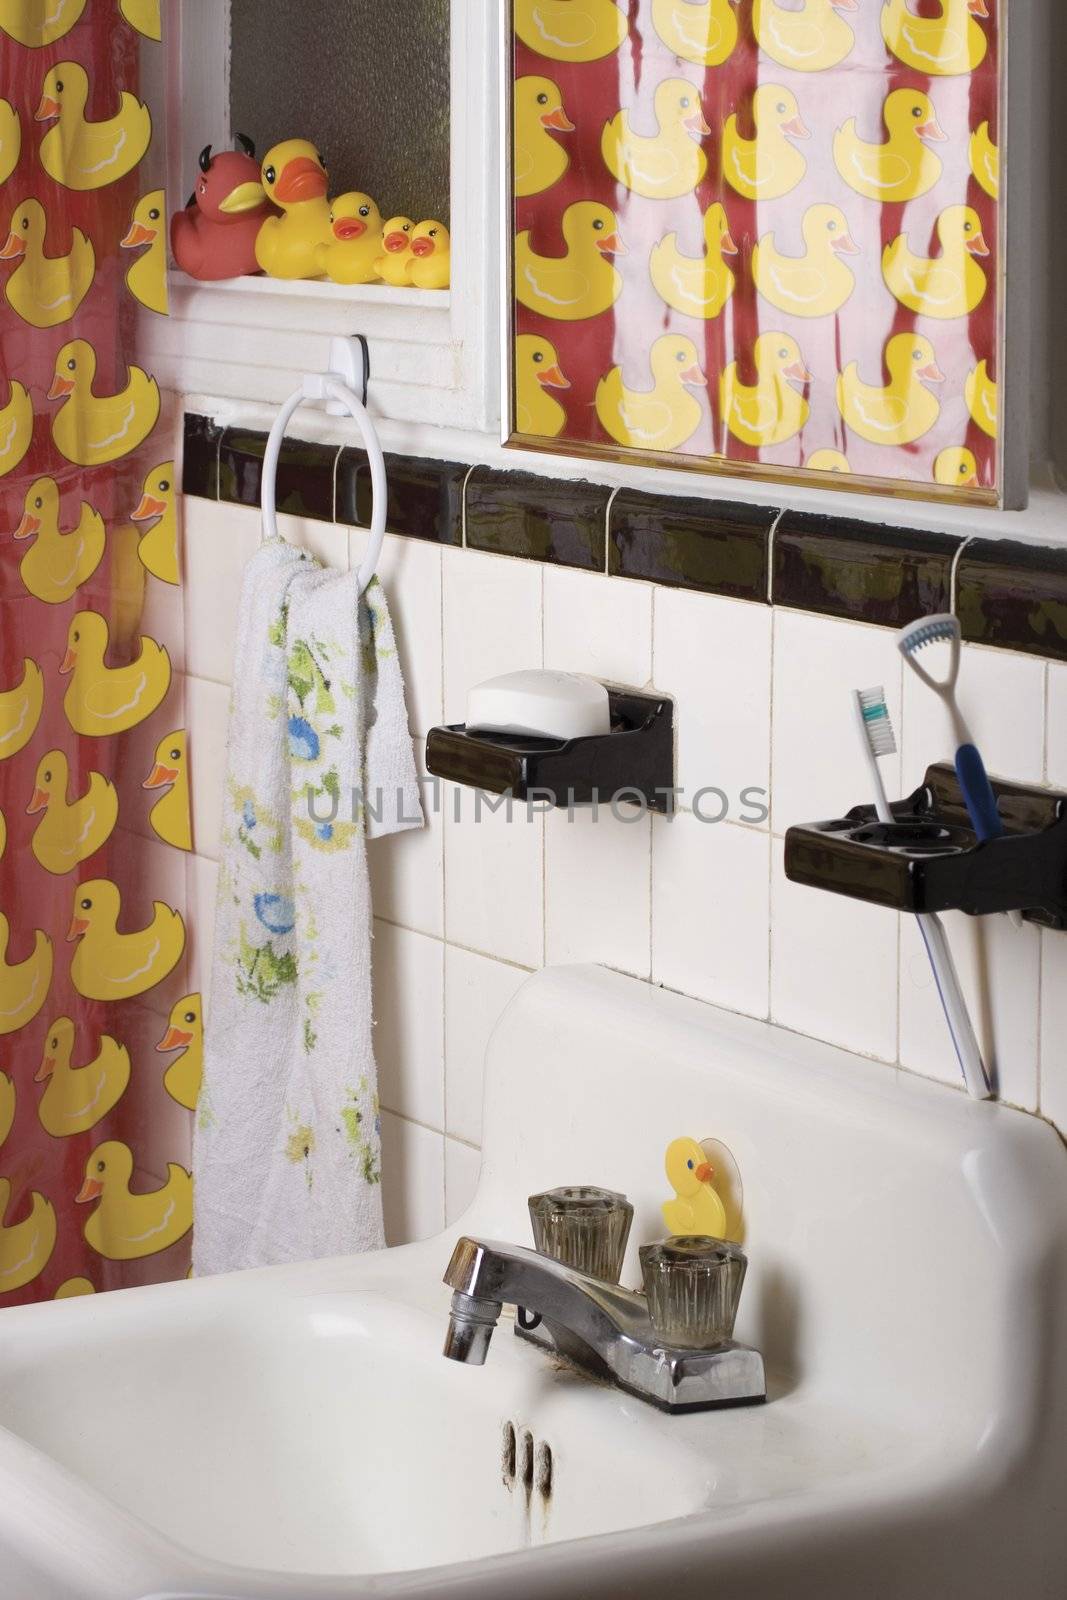 Appartment bathroom decorated with a rubber duck theme